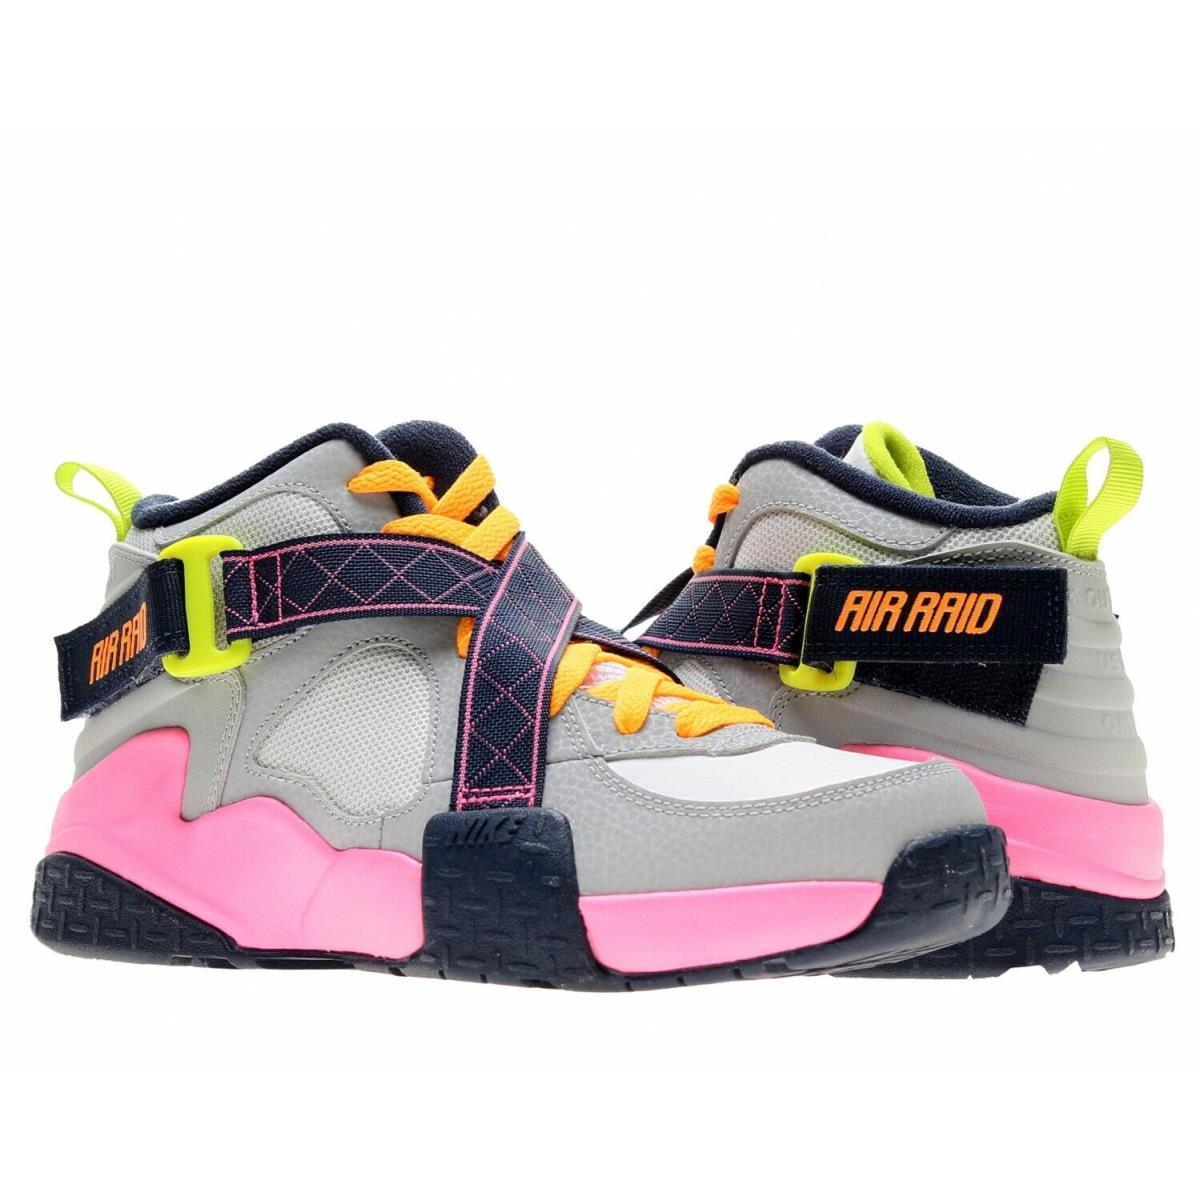 Nike Air Raid Youth Shoes GS `pink Glow` Athletic Sneakers 644882-101 Size 4 7